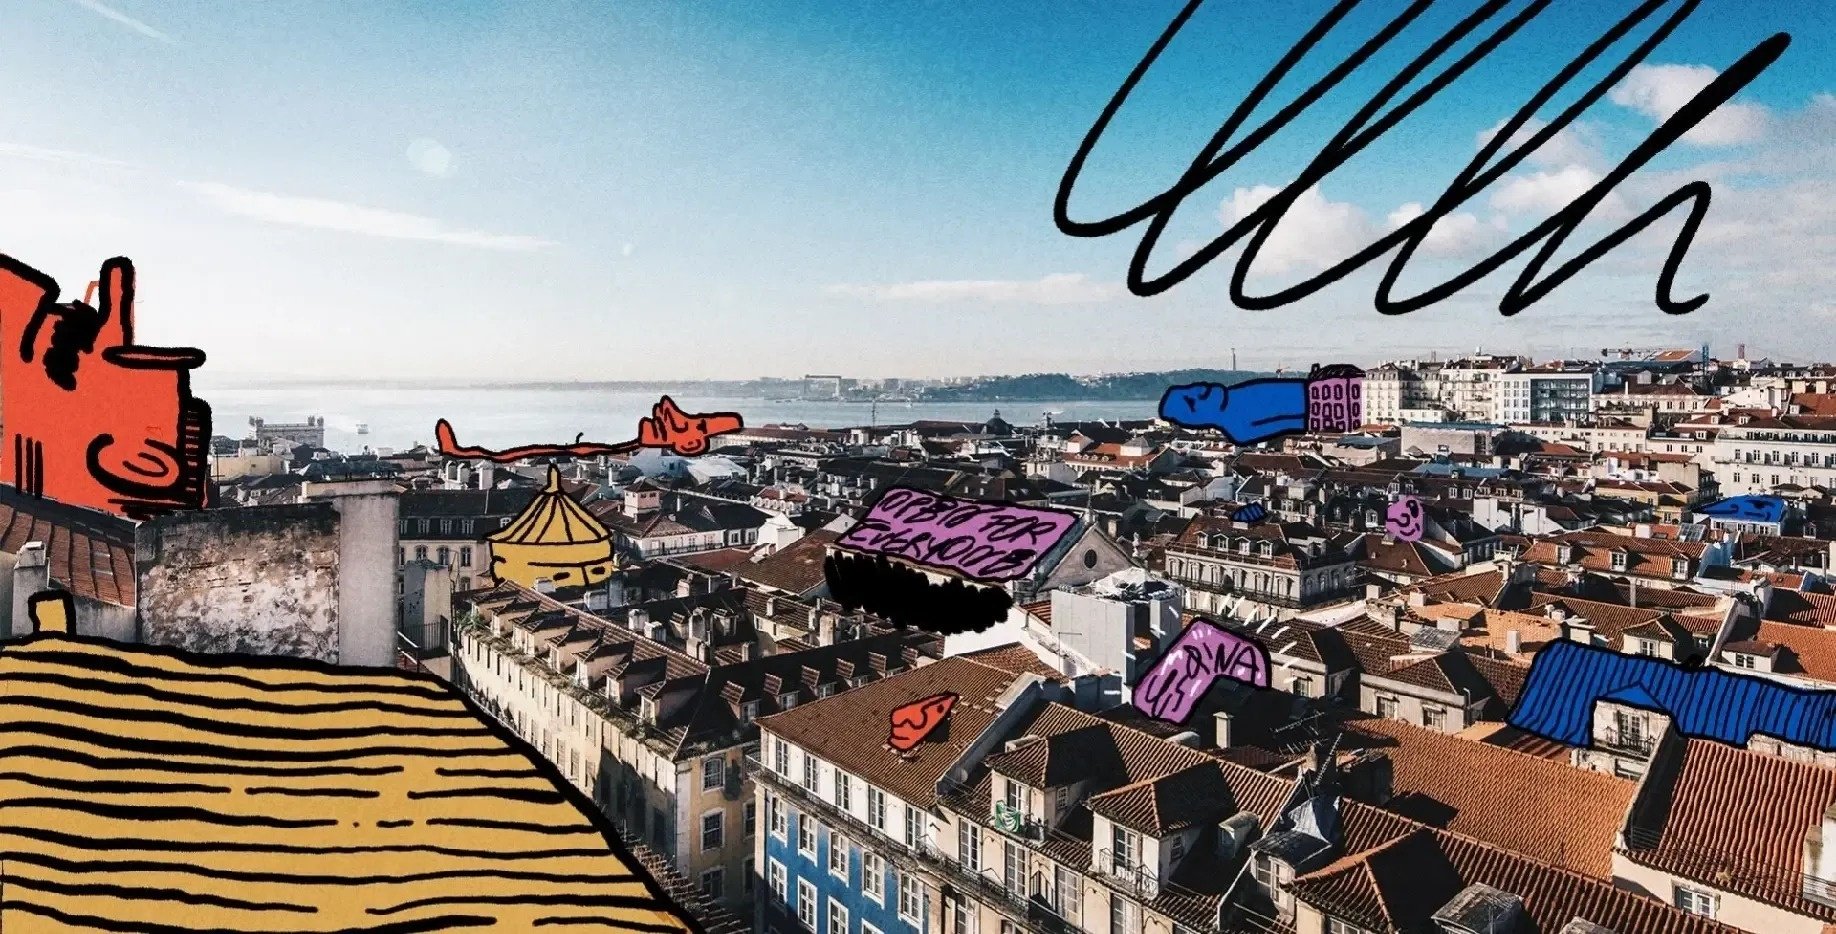 an aerial view of a city with graffiti on the roofs including one that says " i love for evermore "